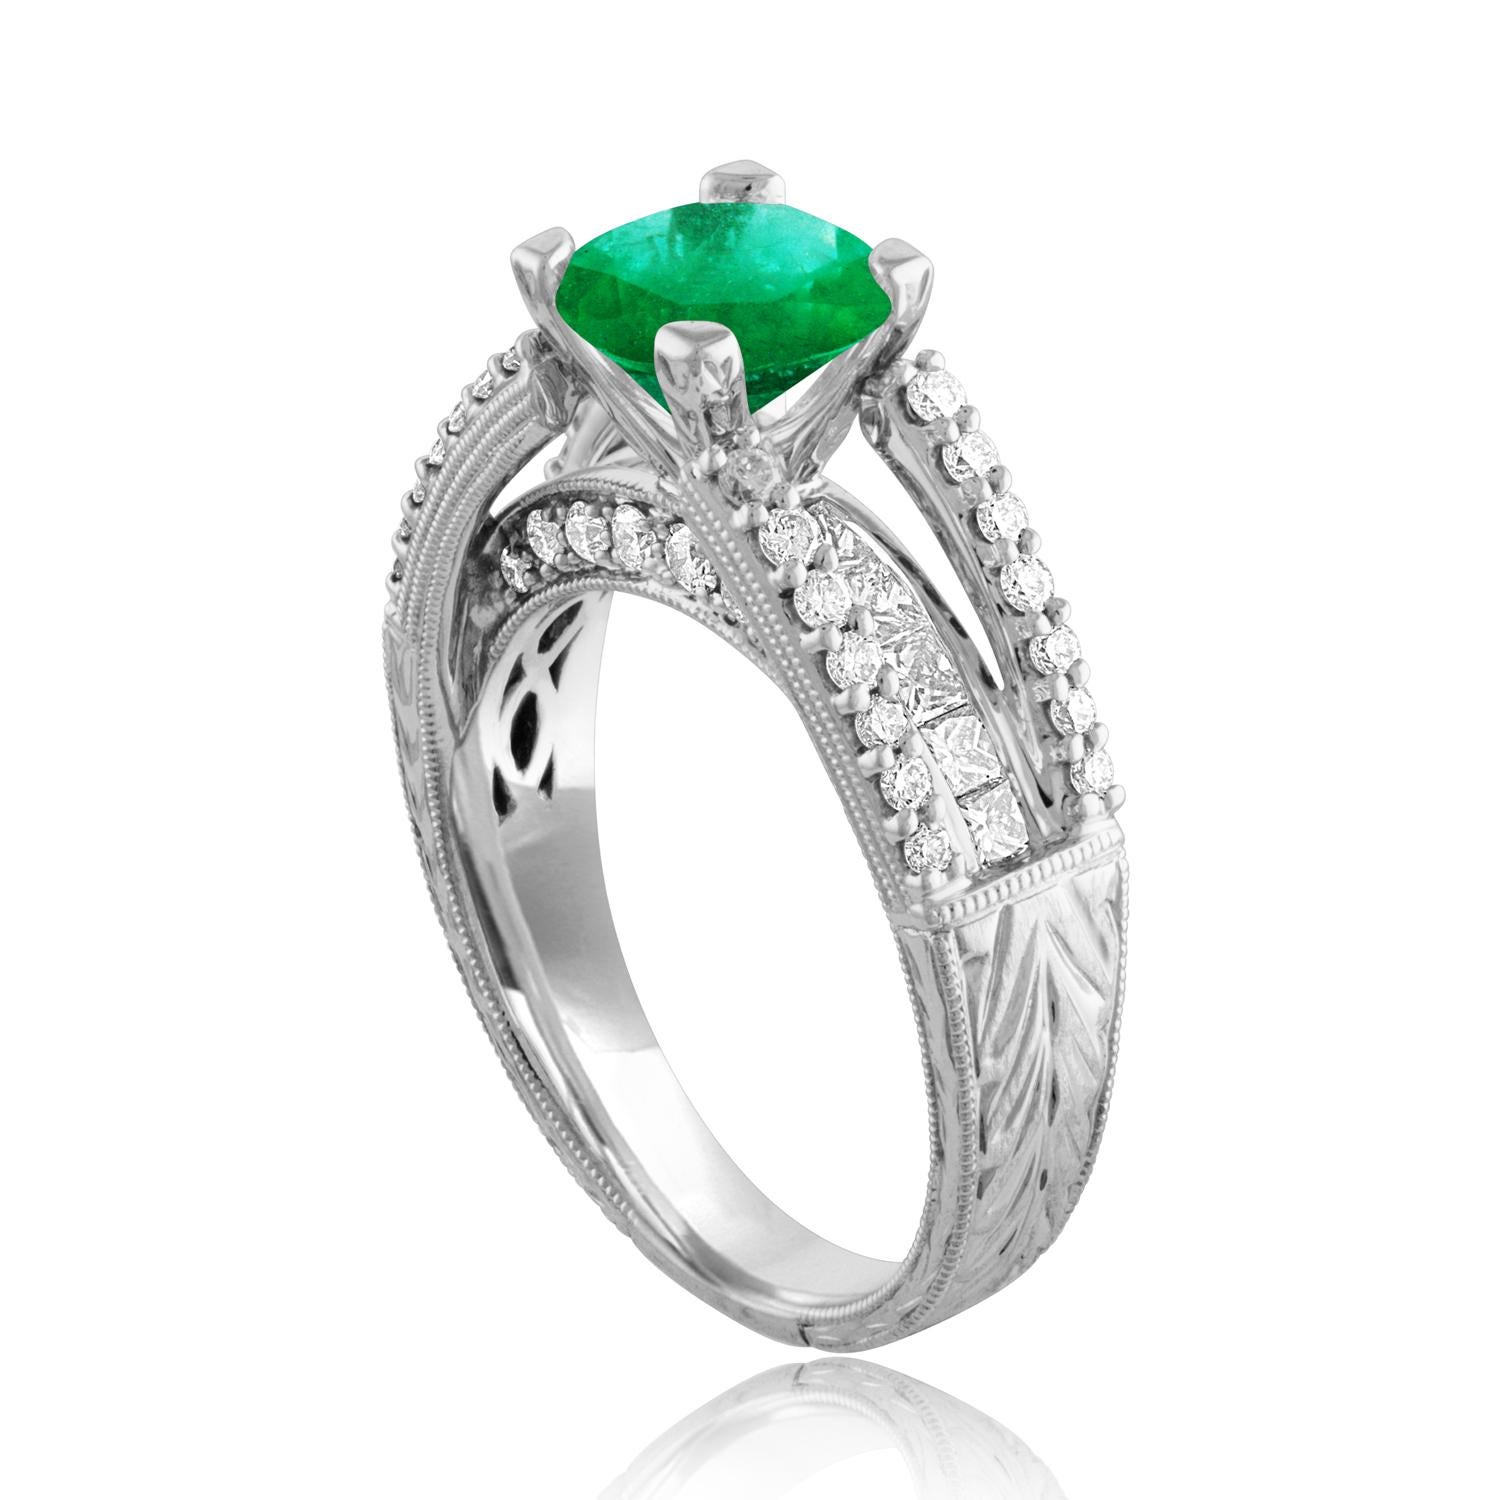 Beautiful Art Deco Revival Round Milgrain Filigree Ring
The ring is 18K White Gold
The Center Stone is a Round Emeralds 1.30 Carats
The Emerald is AGL Certified Heated
There are 0.95 Carats in Diamonds F/G VS/SI
The ring is a size 6.75, sizable.
The